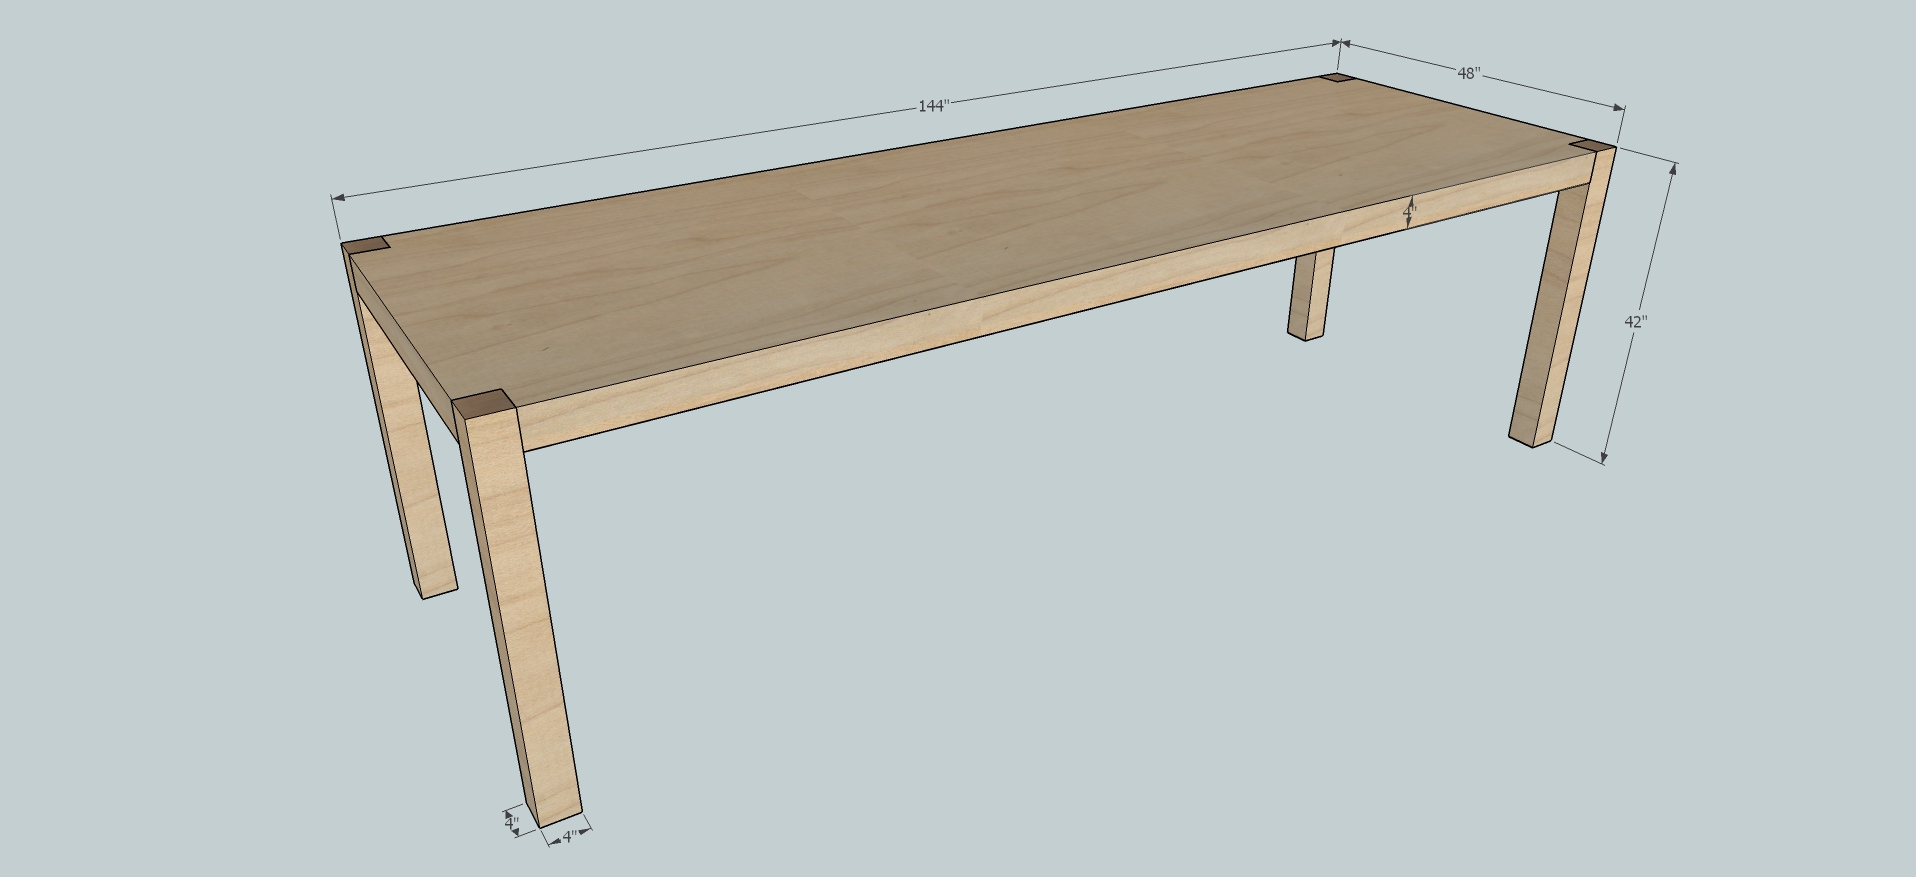 How to Build a Maple Parsons Table for 12 - Part 1 ...